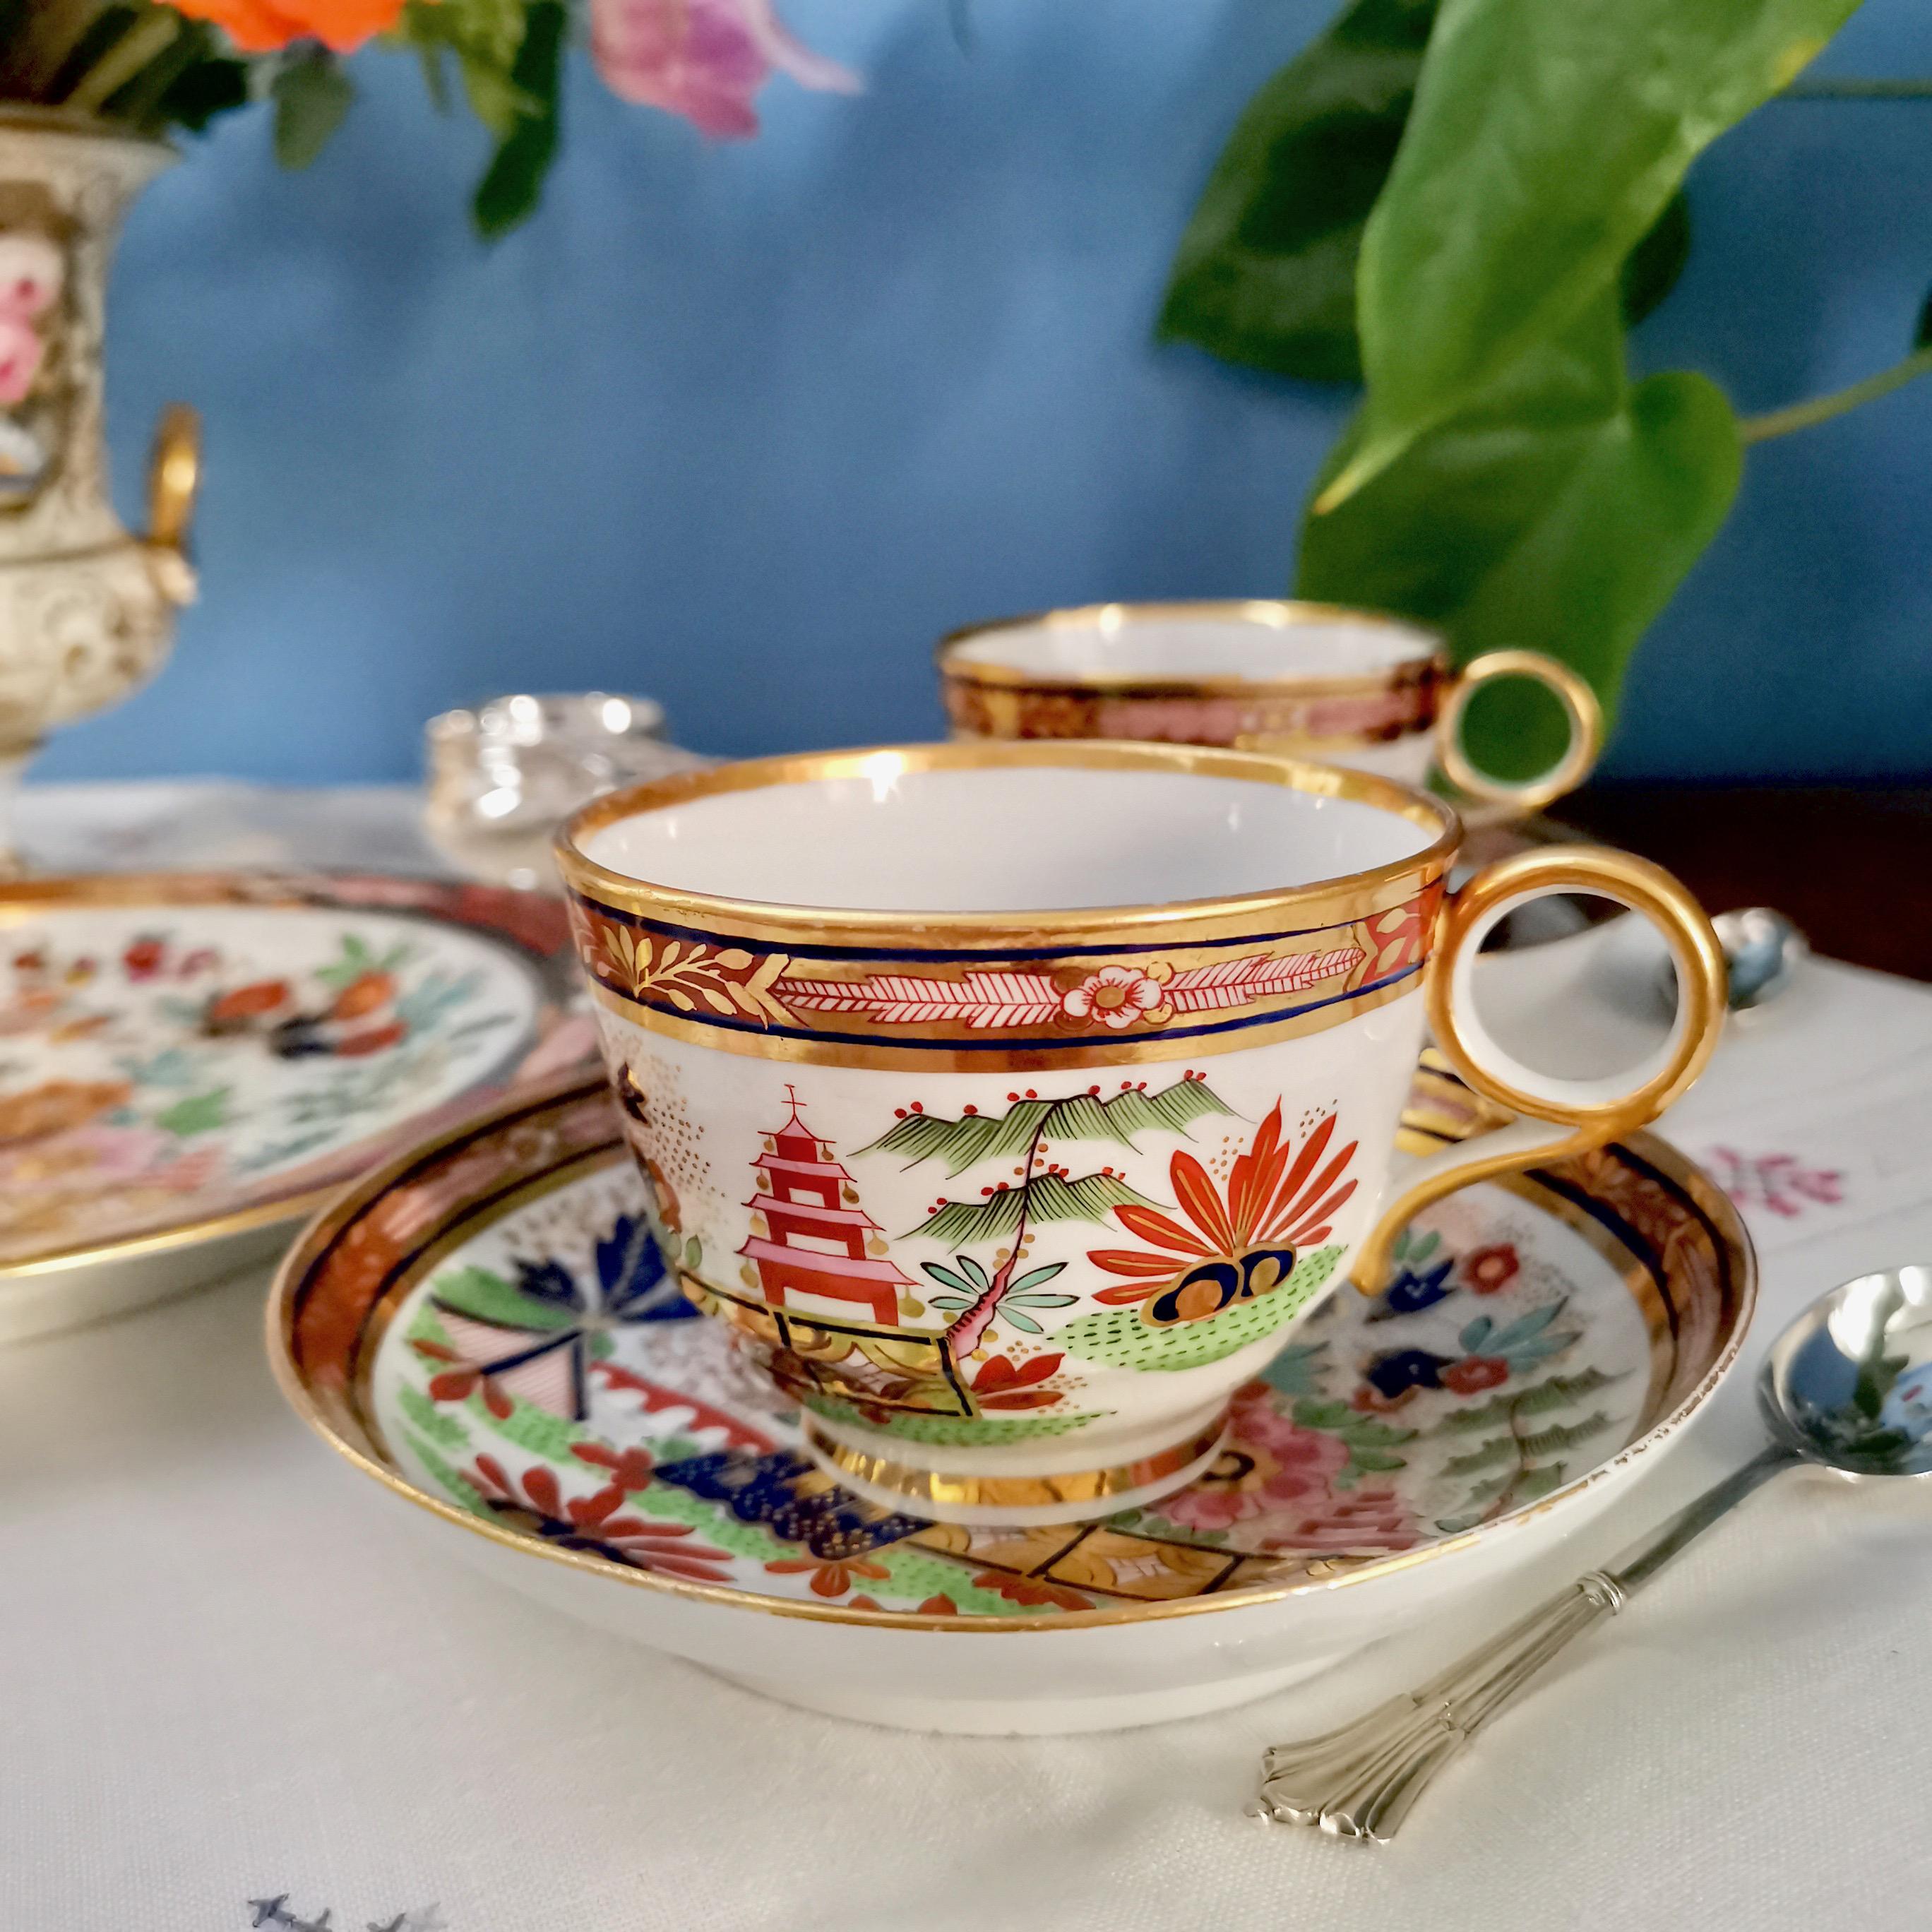 This is a spectacular teacup and saucer made by Barr Flight & Barr circa 1811, which was the Regency era. It is made in the bute shape and has what is often called the 